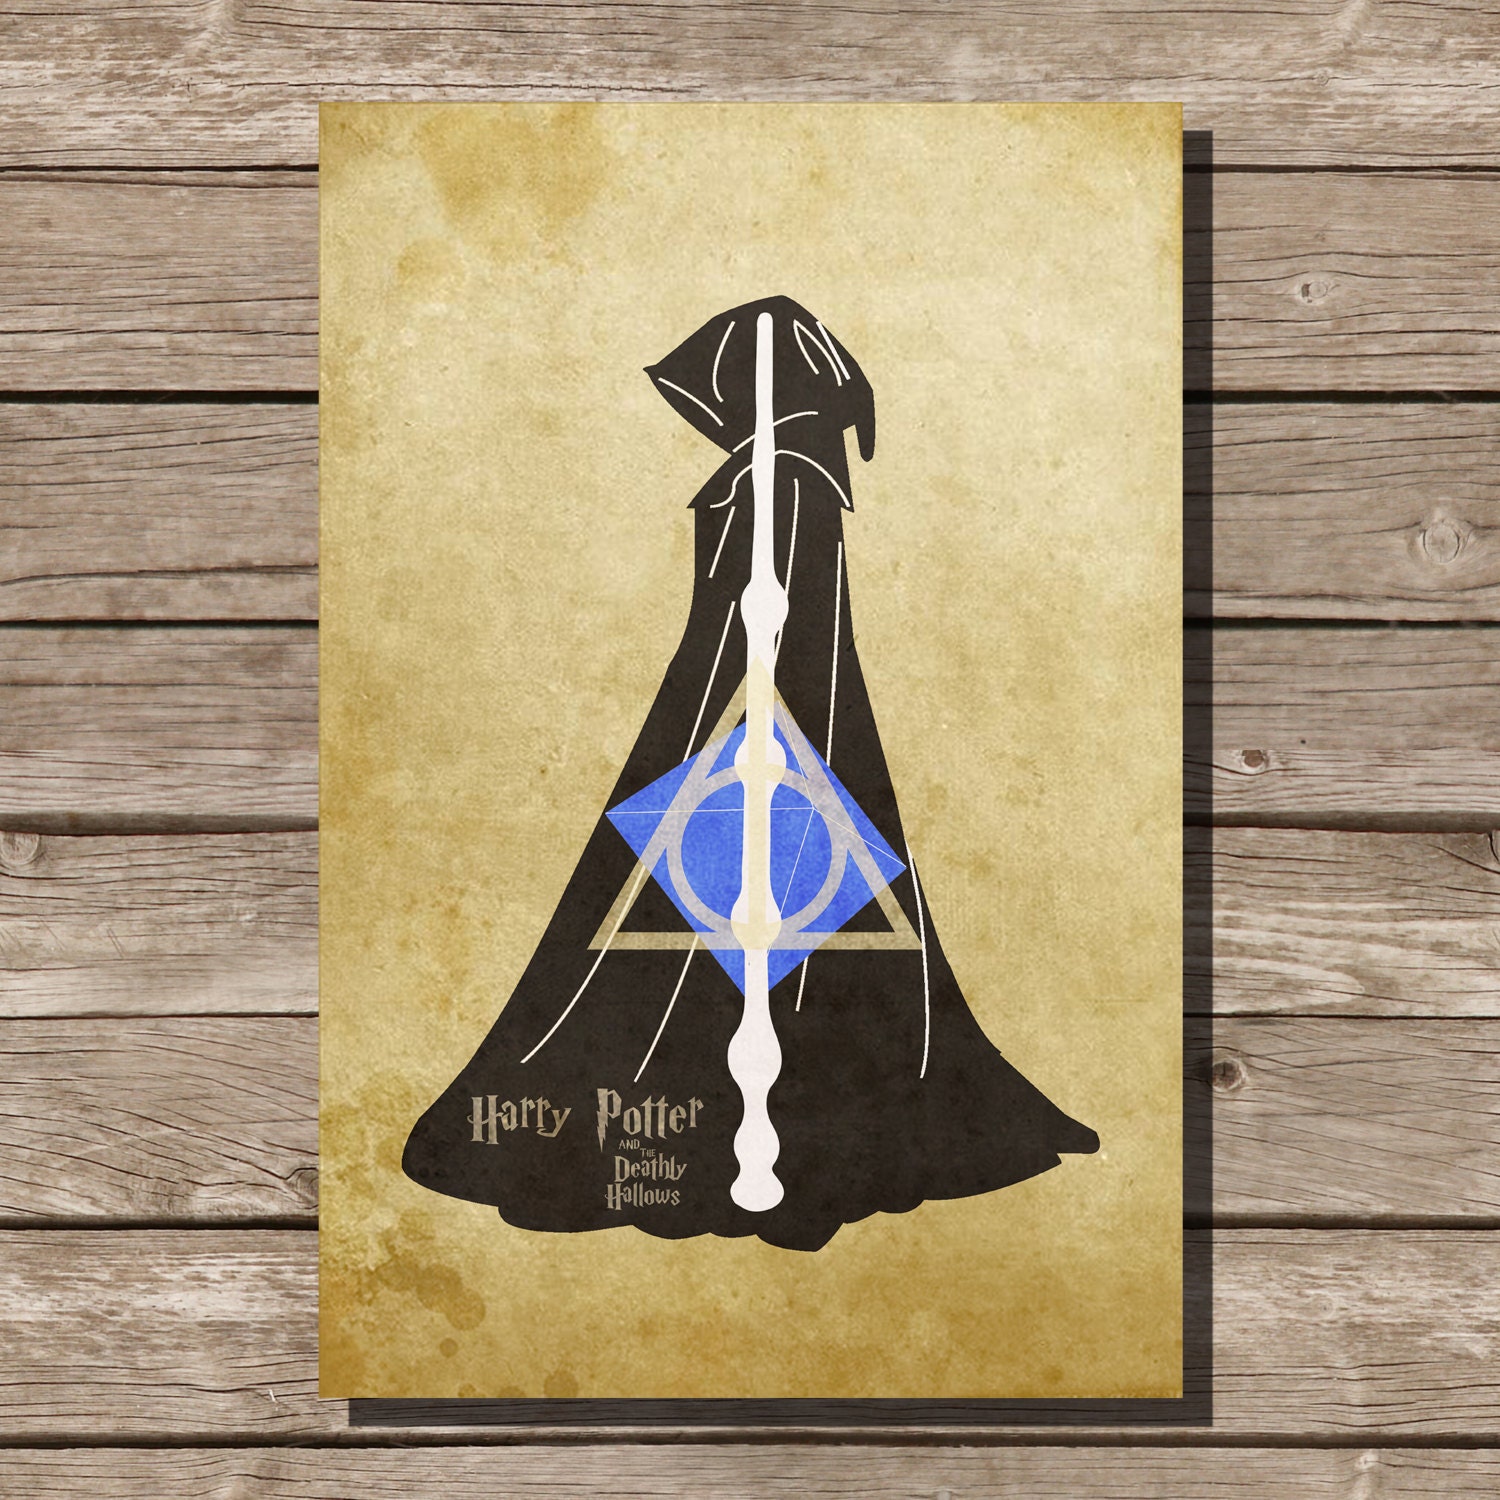 Harry Potter and the Deathly Hallows movie poster Harry Potter